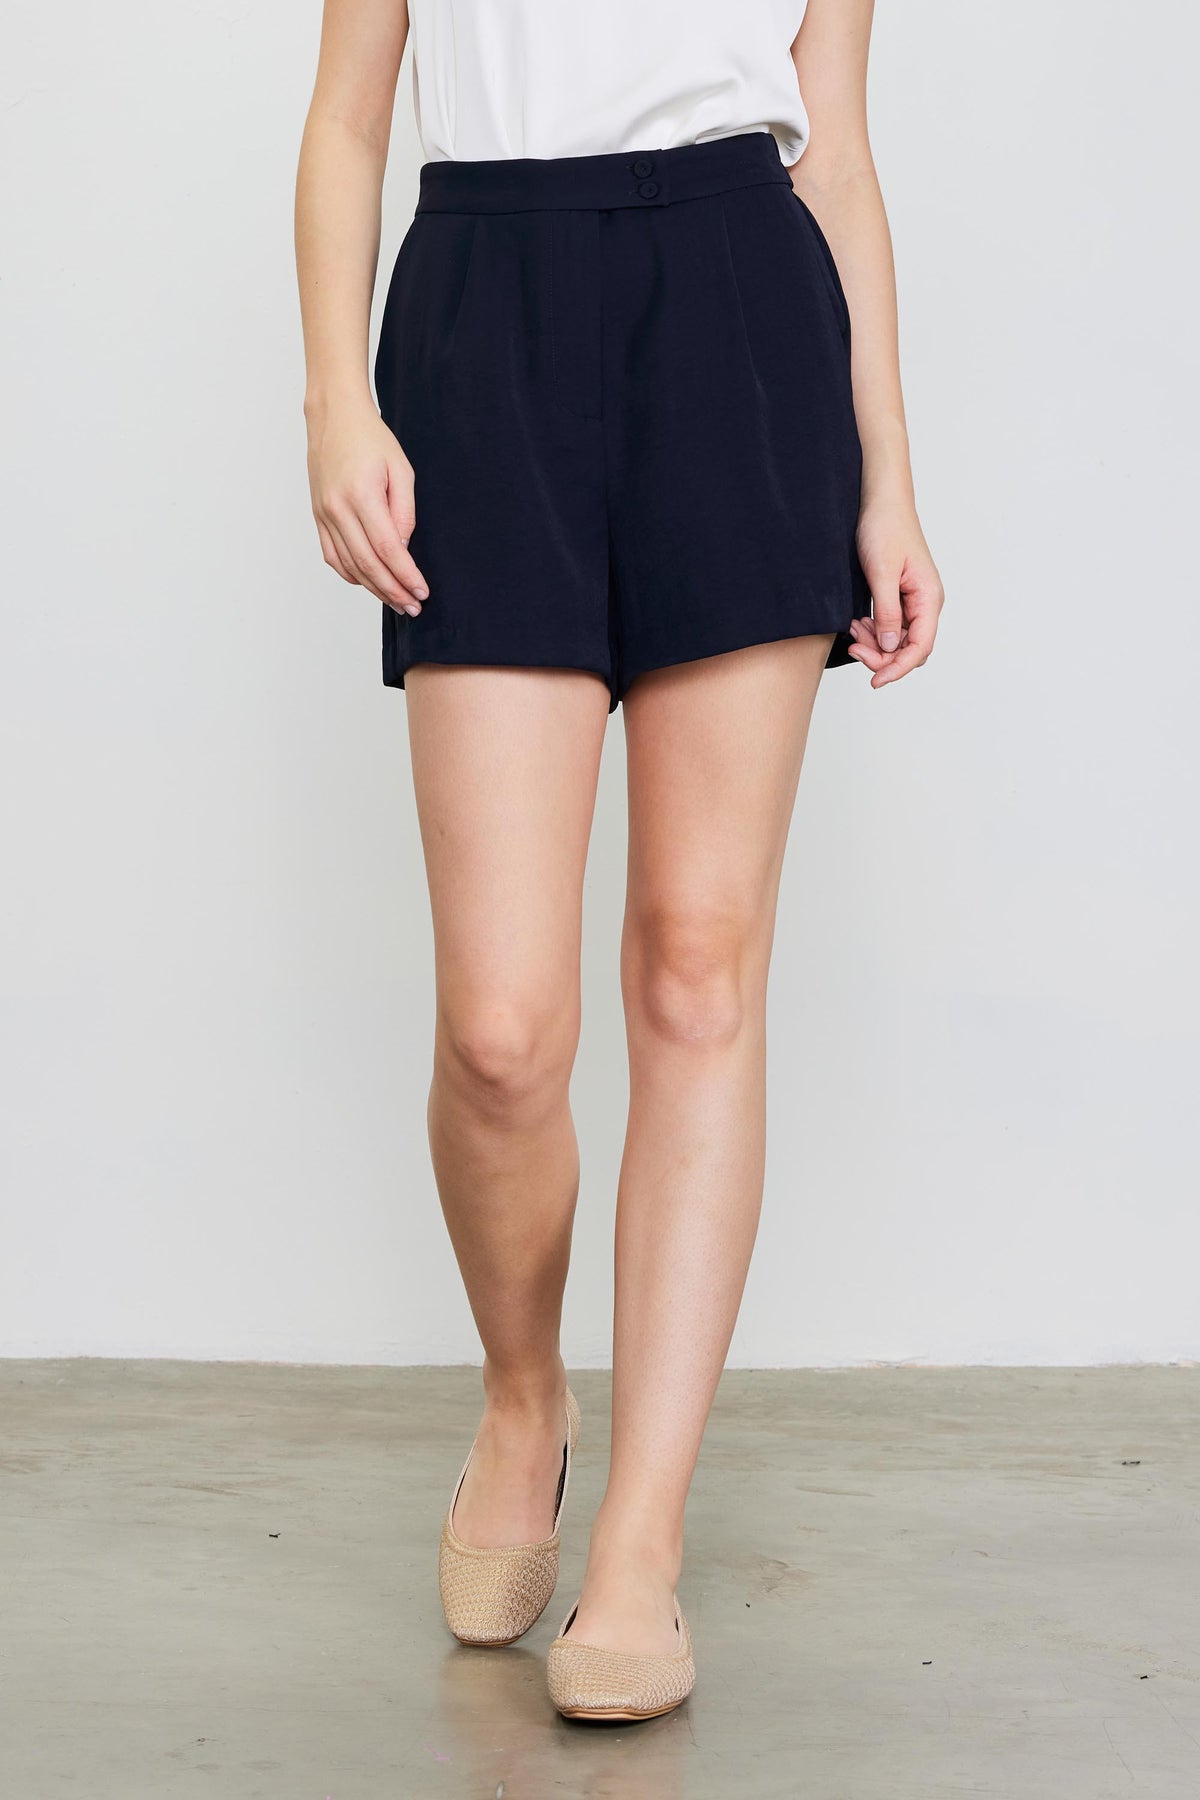 dress it up tailored shorts